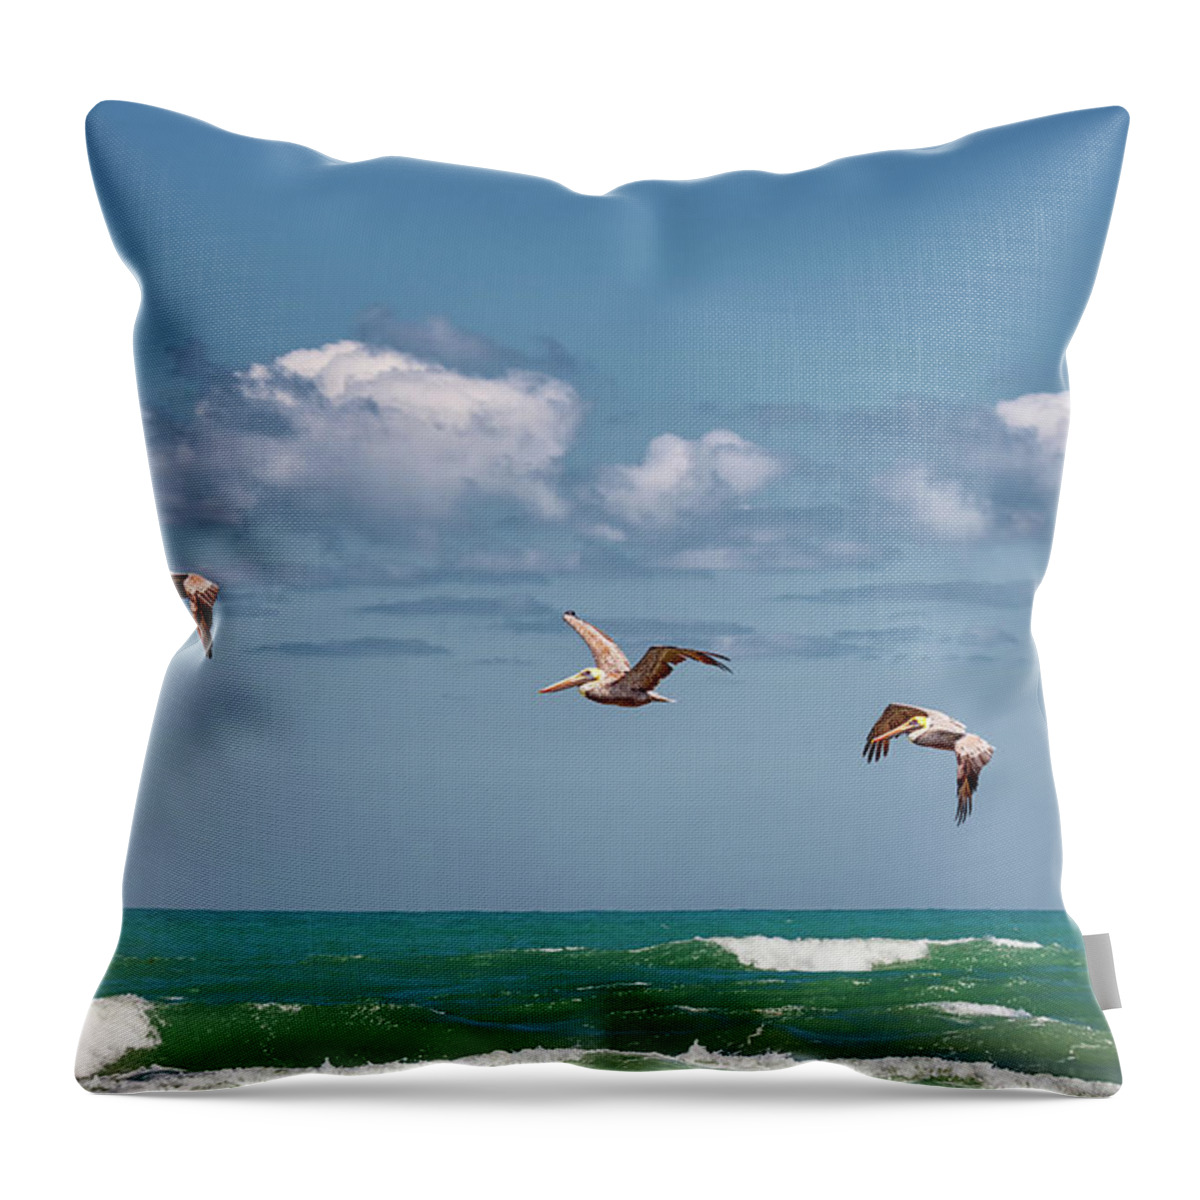 Brown Pelican Throw Pillow featuring the photograph South Padre Island Pelicans by Victor Culpepper